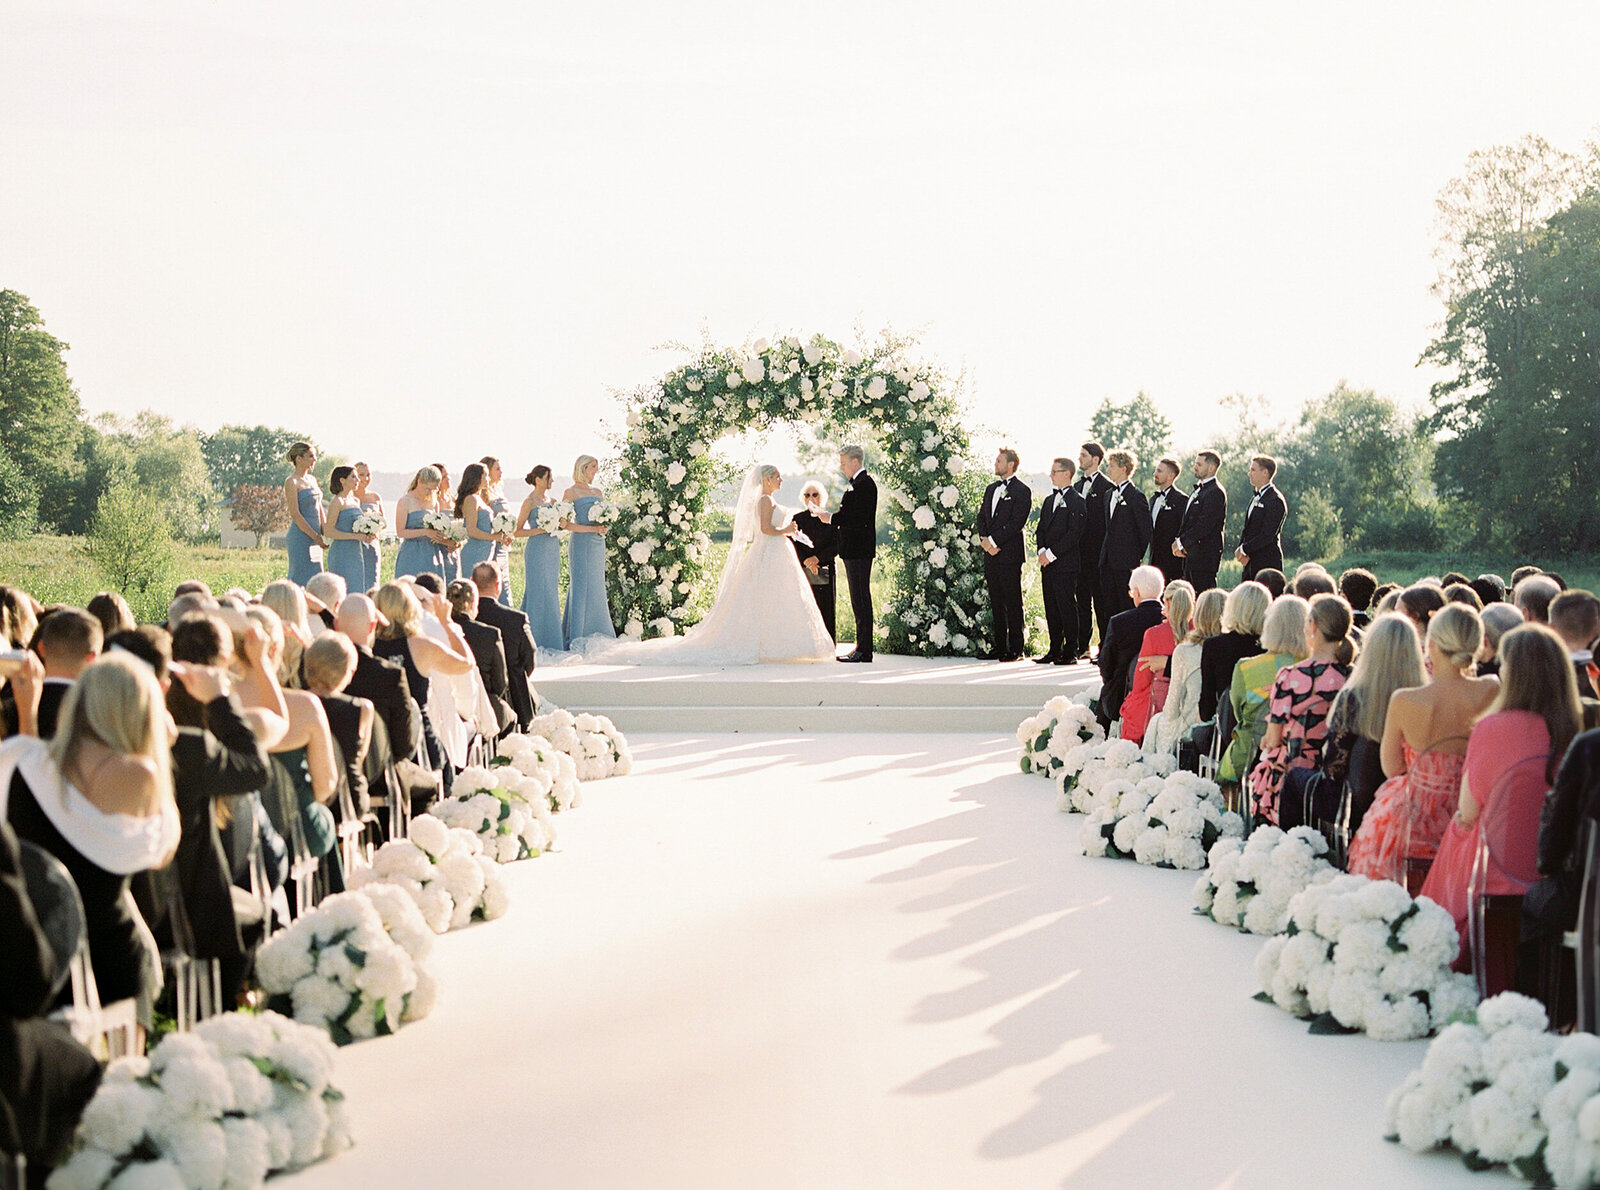 A Swedish wedding ceremony at Rånäs Slott with a large group of people.